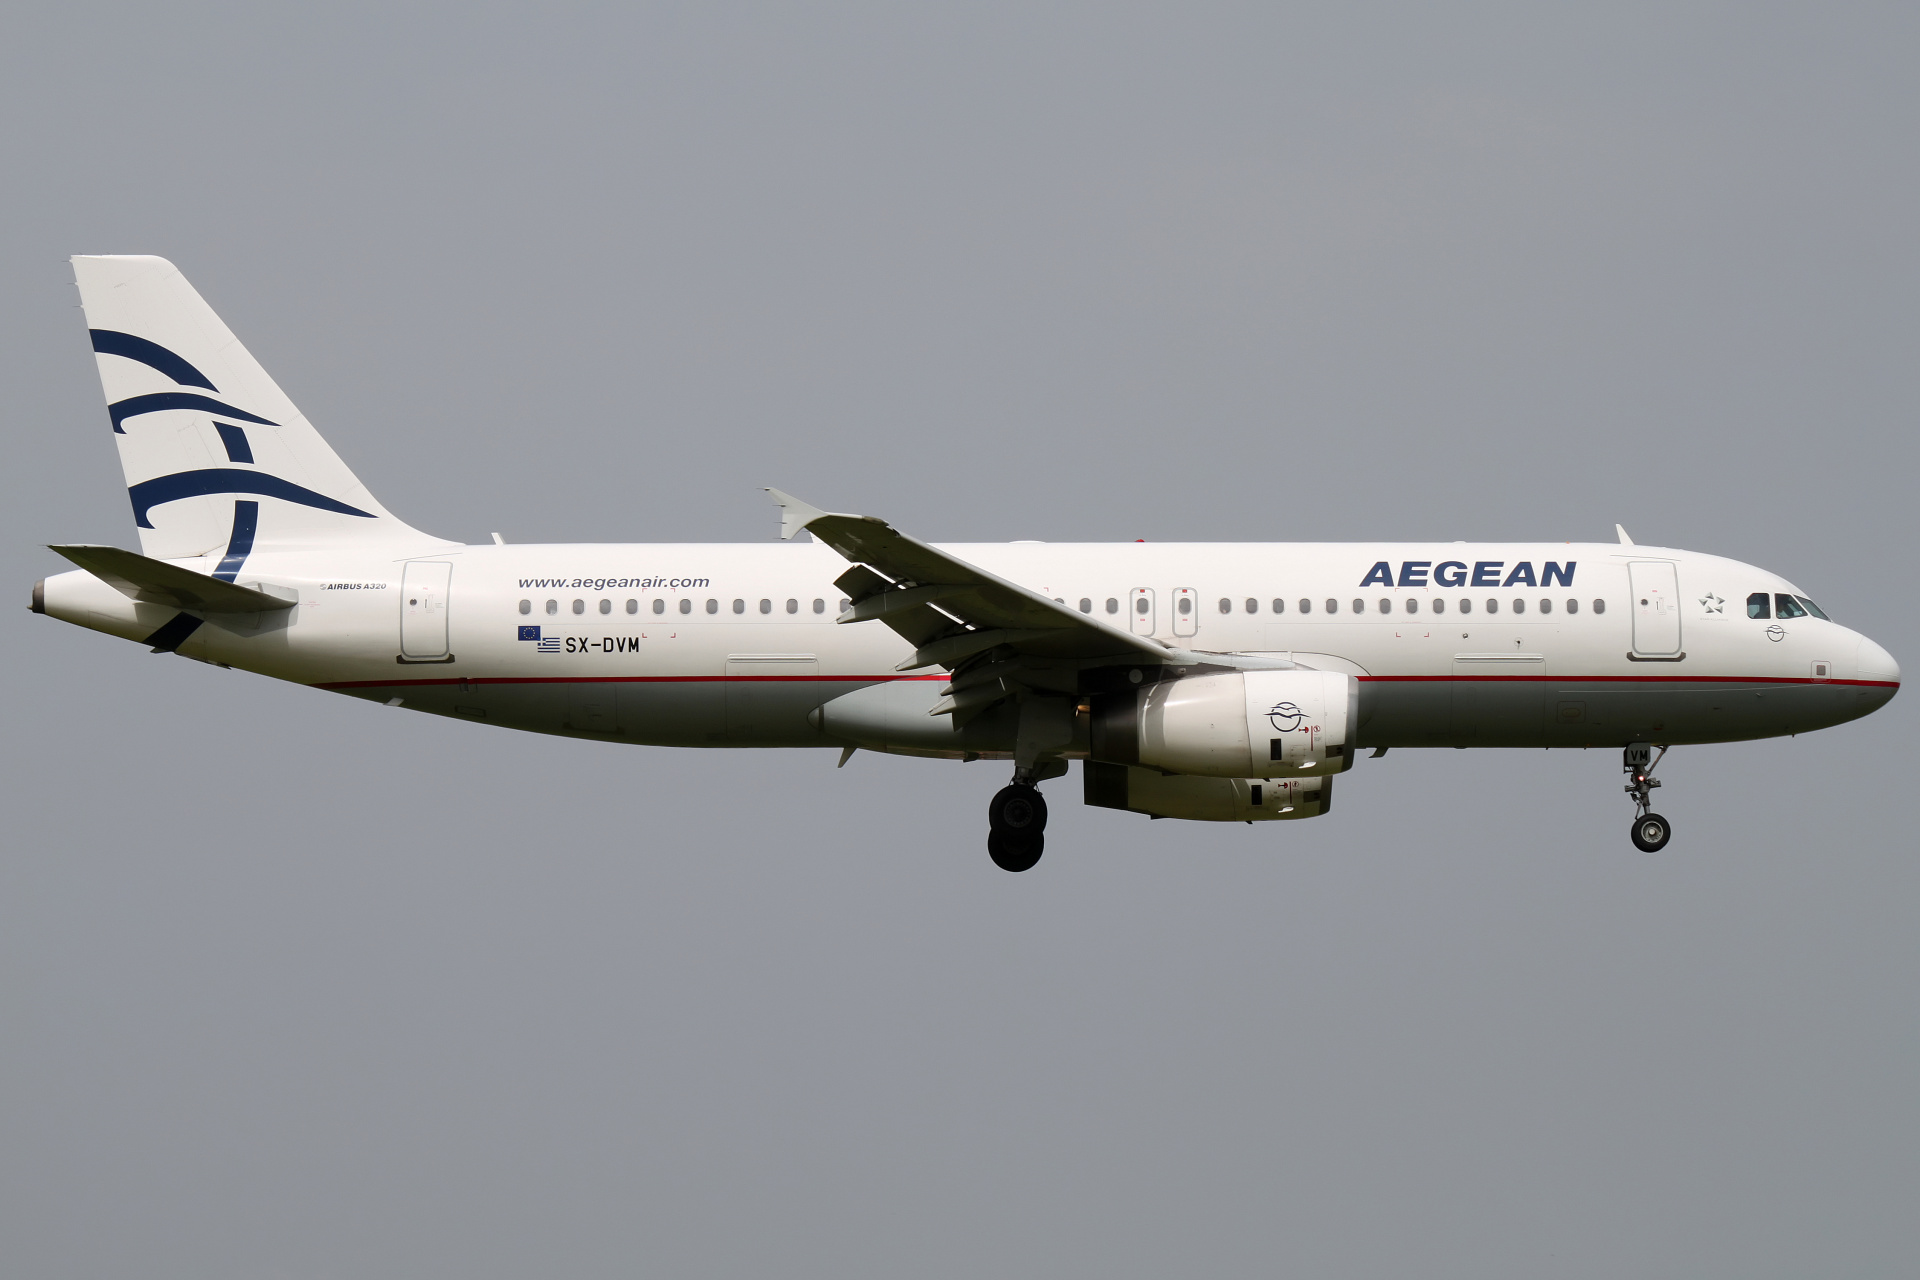 SX-DVM (Aircraft » EPWA Spotting » Airbus A320-200 » Aegean Airlines)